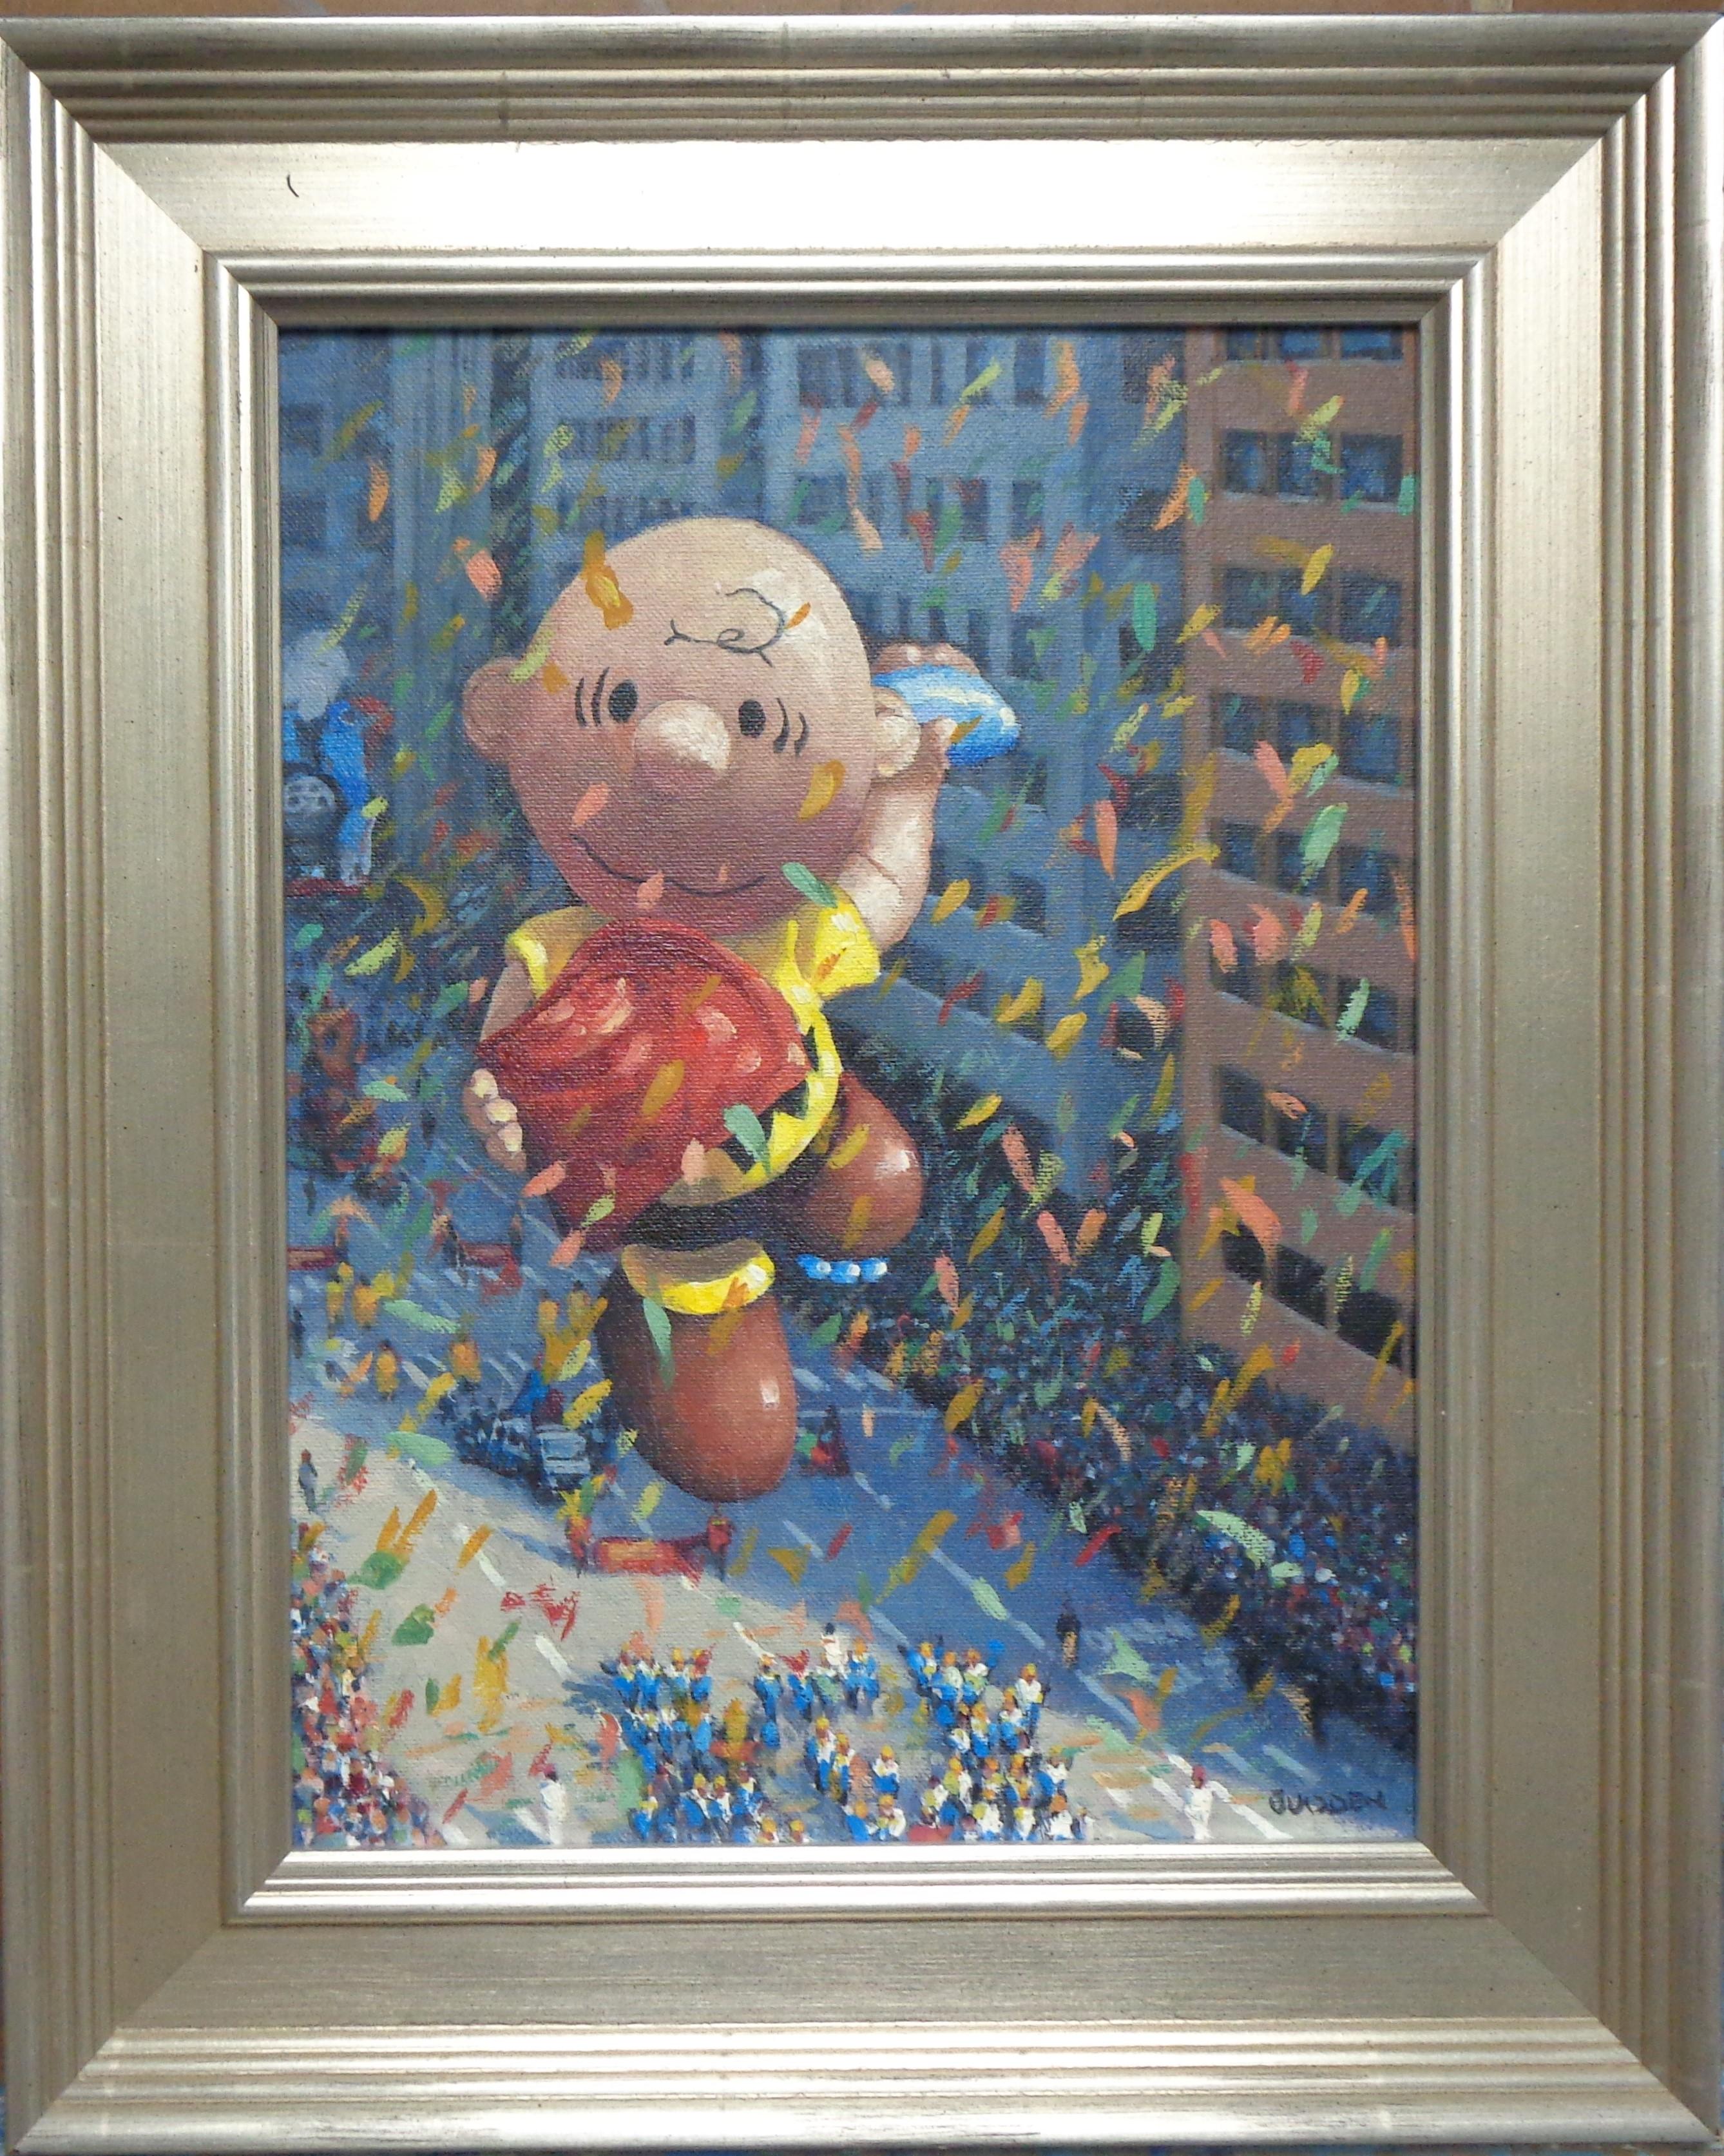 Macy's Charlie Brown
Part of a series of 11 paintings.
An oil painting on canvas panel by award winning contemporary artist Michael Budden that showcases images from the Macy's Thanksgiving Parade, NYC. The image measures 12 x 9 unframed and 15.75 x